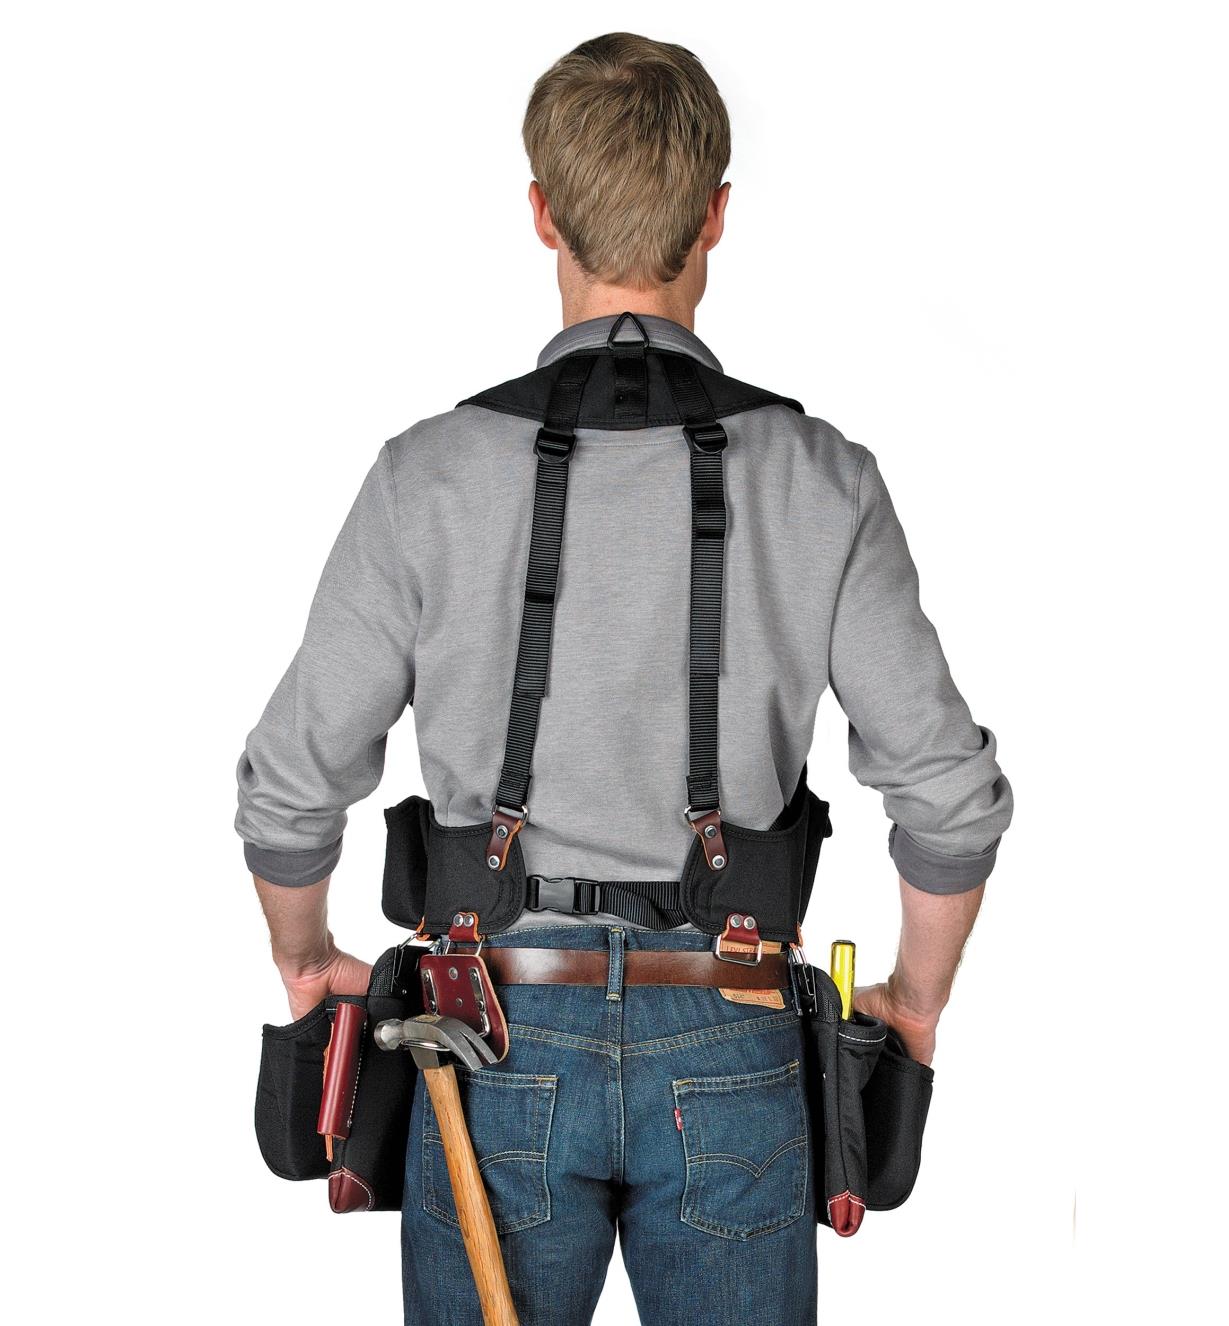 Back view of man wearing builder's vest with clip-on tool bag and fastener bag (sold separately).